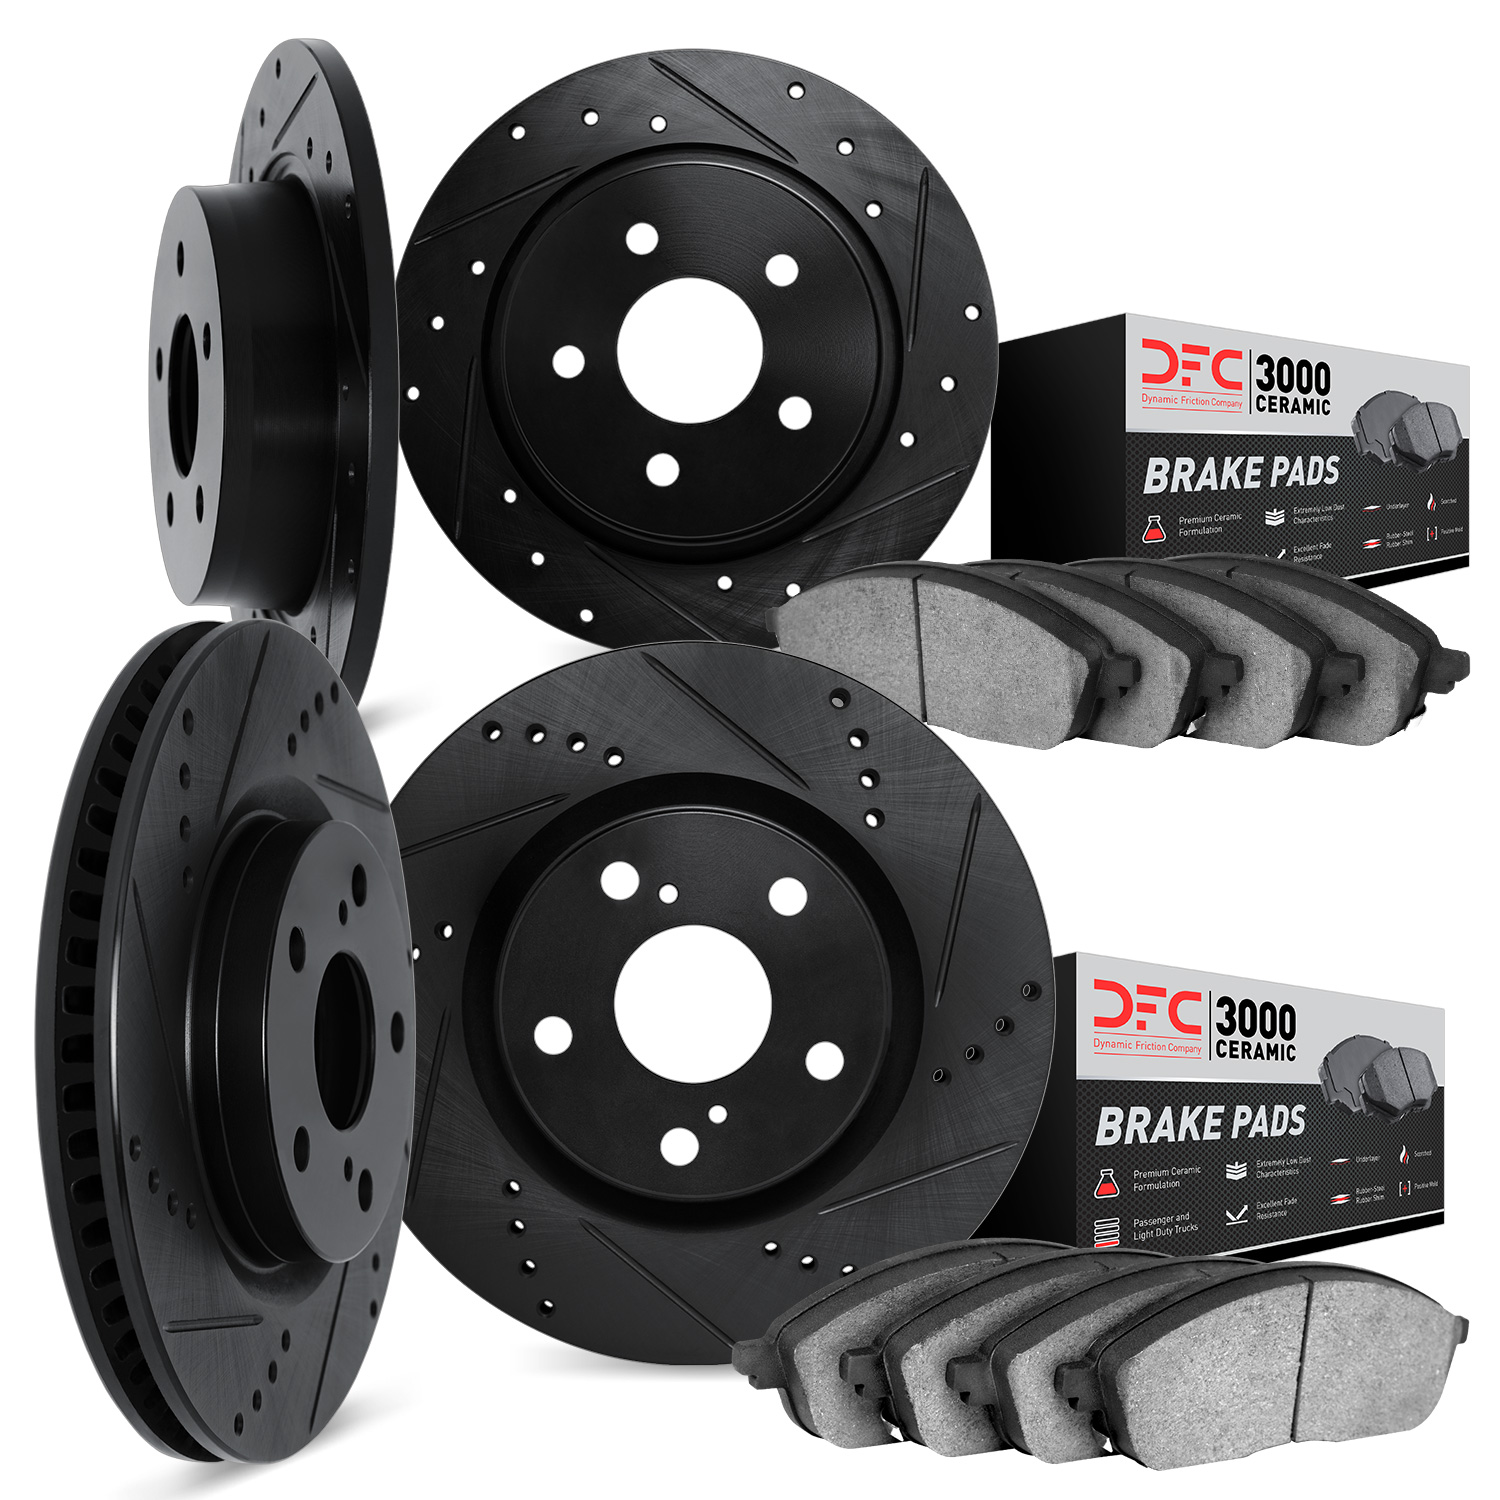 8304-58019 Drilled/Slotted Brake Rotors with 3000-Series Ceramic Brake Pads Kit [Black], 2014-2016 Acura/Honda, Position: Front